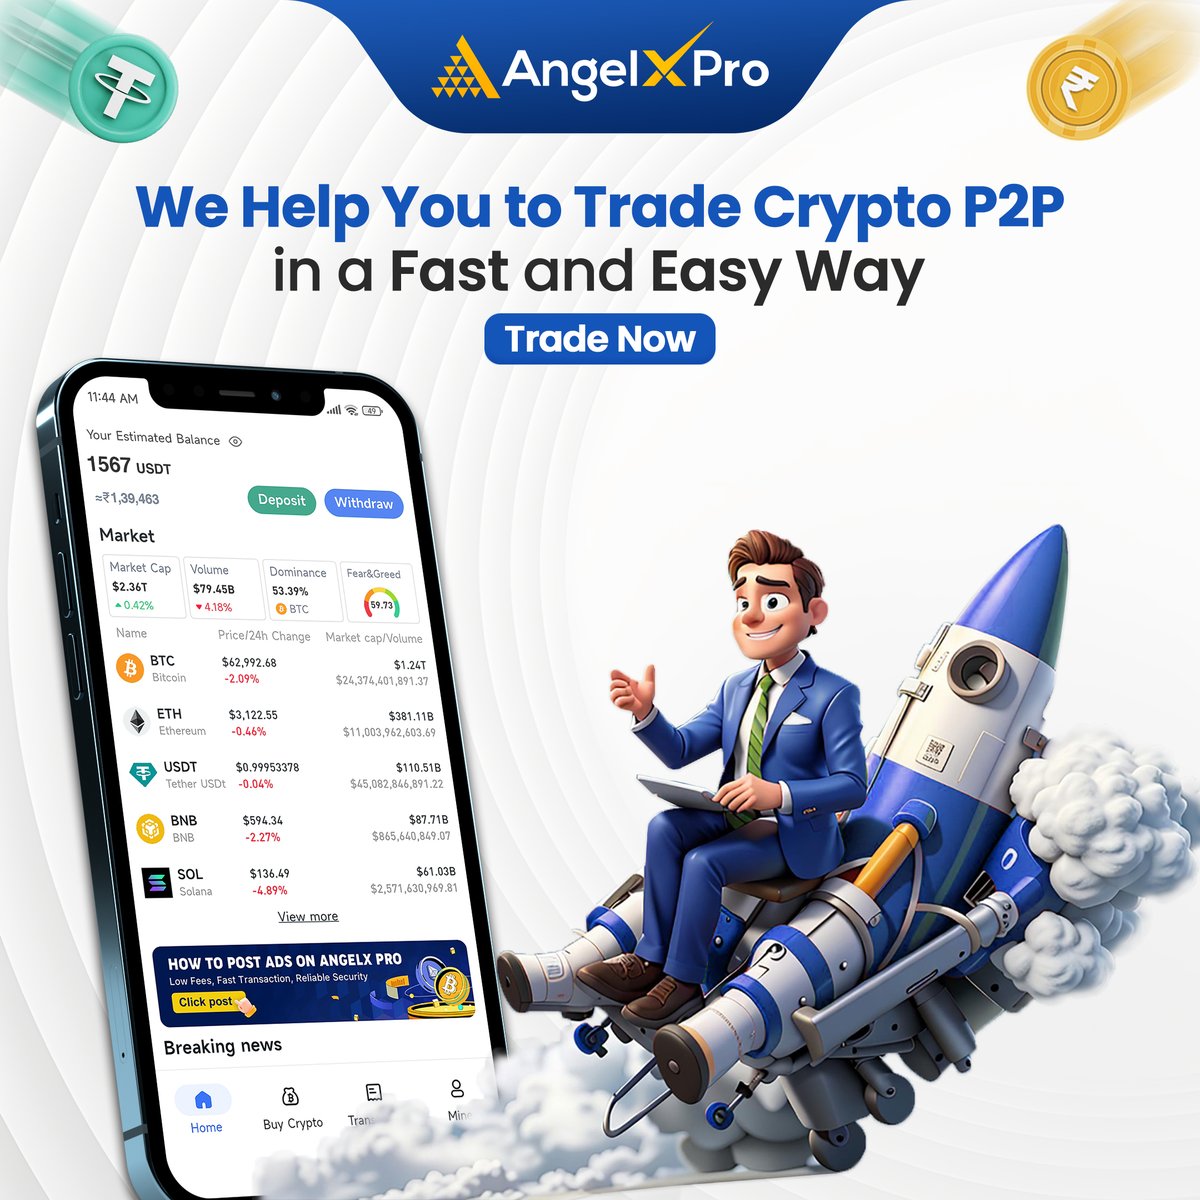 Discover the fast and easy way to trade crypto #P2P  with #AngelX #OTCMarkets Platform! 🚀💼

#AngelX #cryptoexchange #cryptotrading #cryptocurrencies #crypto #blockchain #cryptocurrency #ethereum #btc #cryptocurrencymarket #altcoins